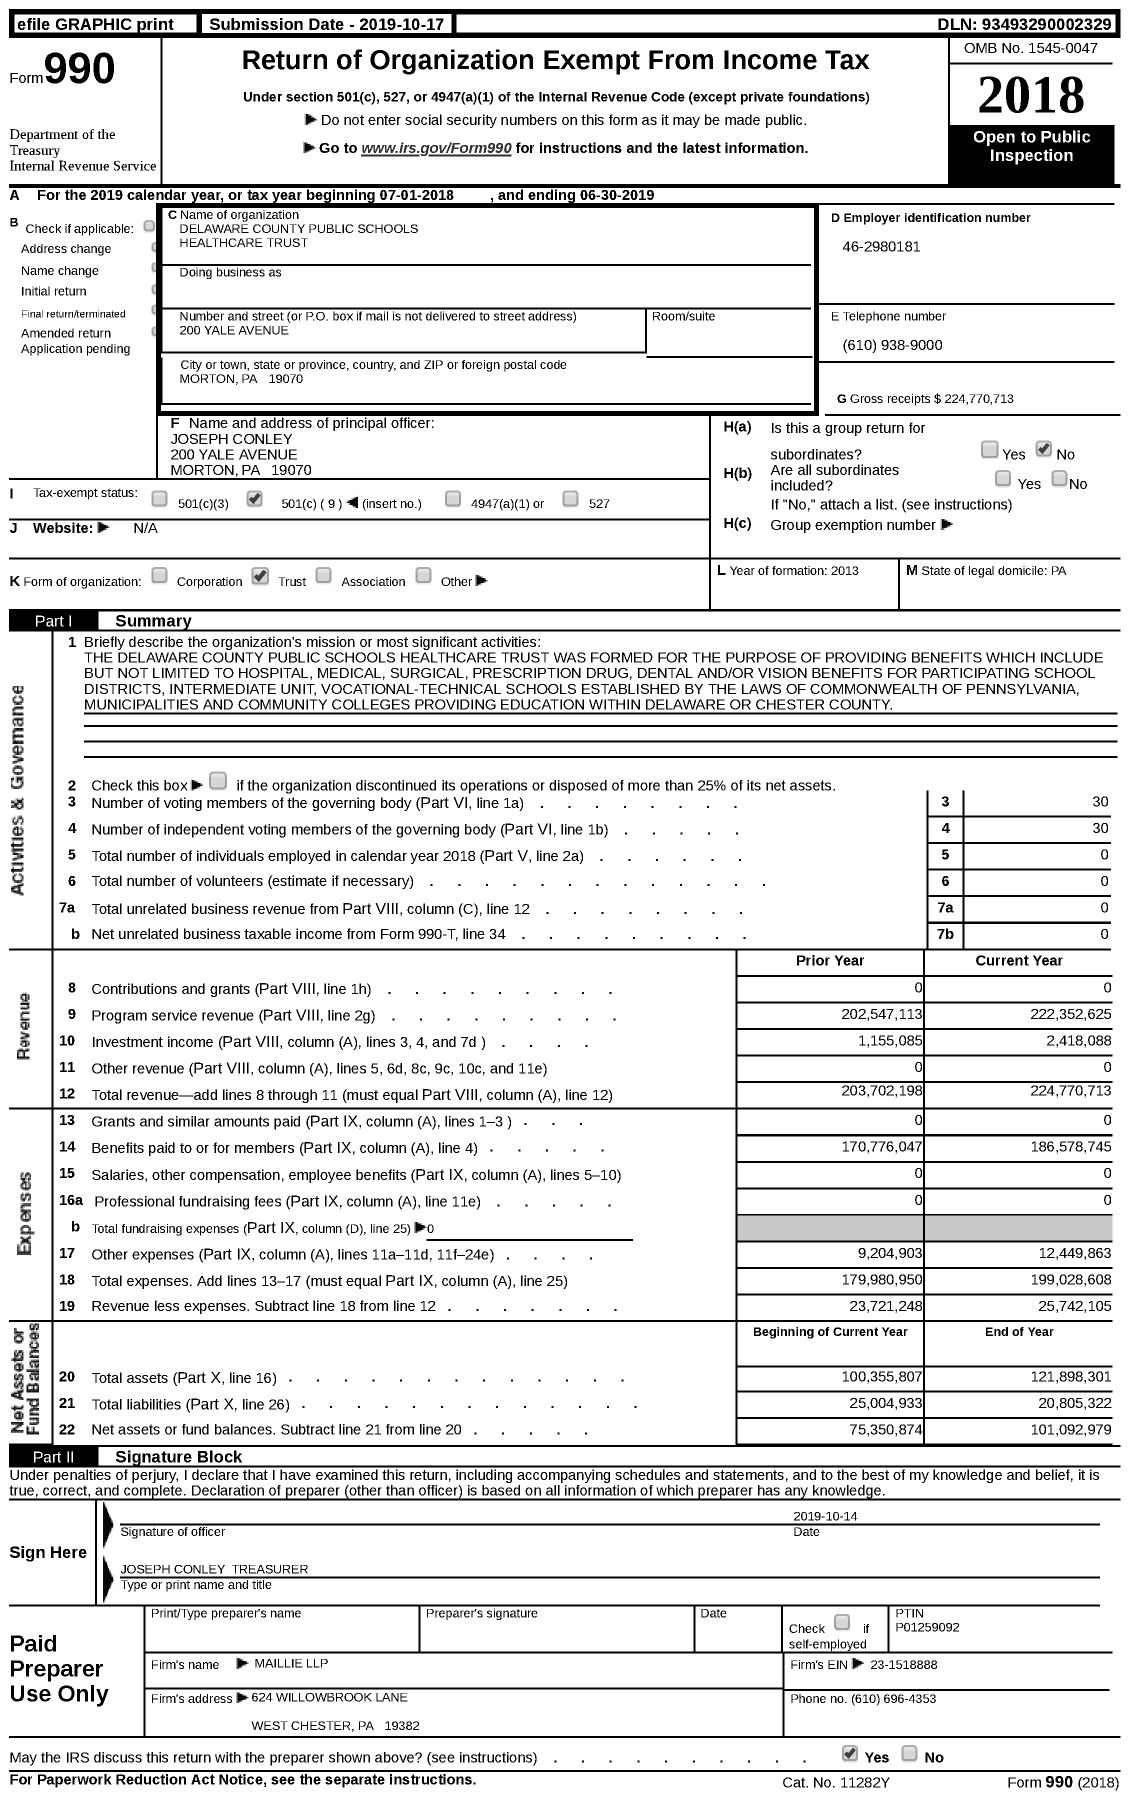 Image of first page of 2018 Form 990 for Delaware County Public Schools Healthcare Trust